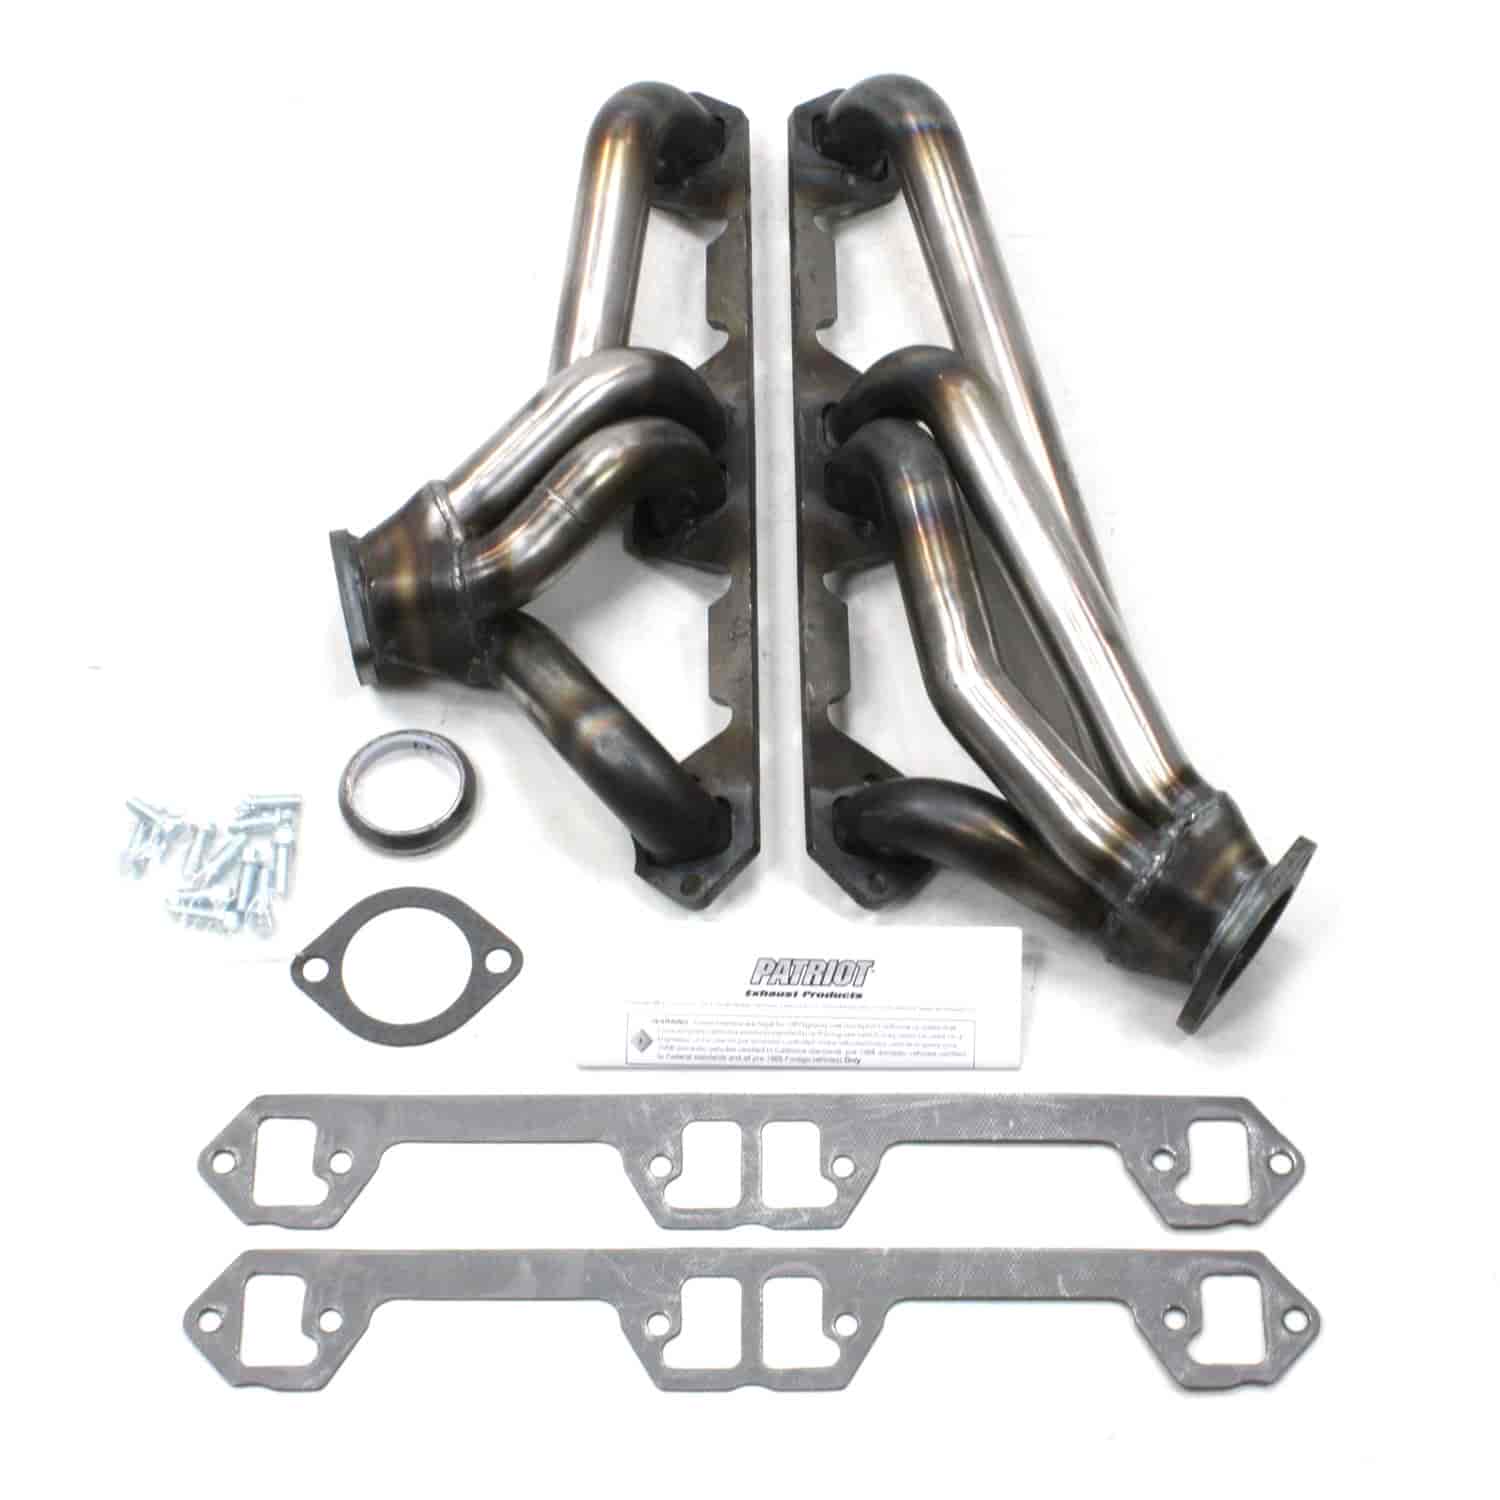 AMC/Jeep Specific Fit Headers 290-401 1-5/8"